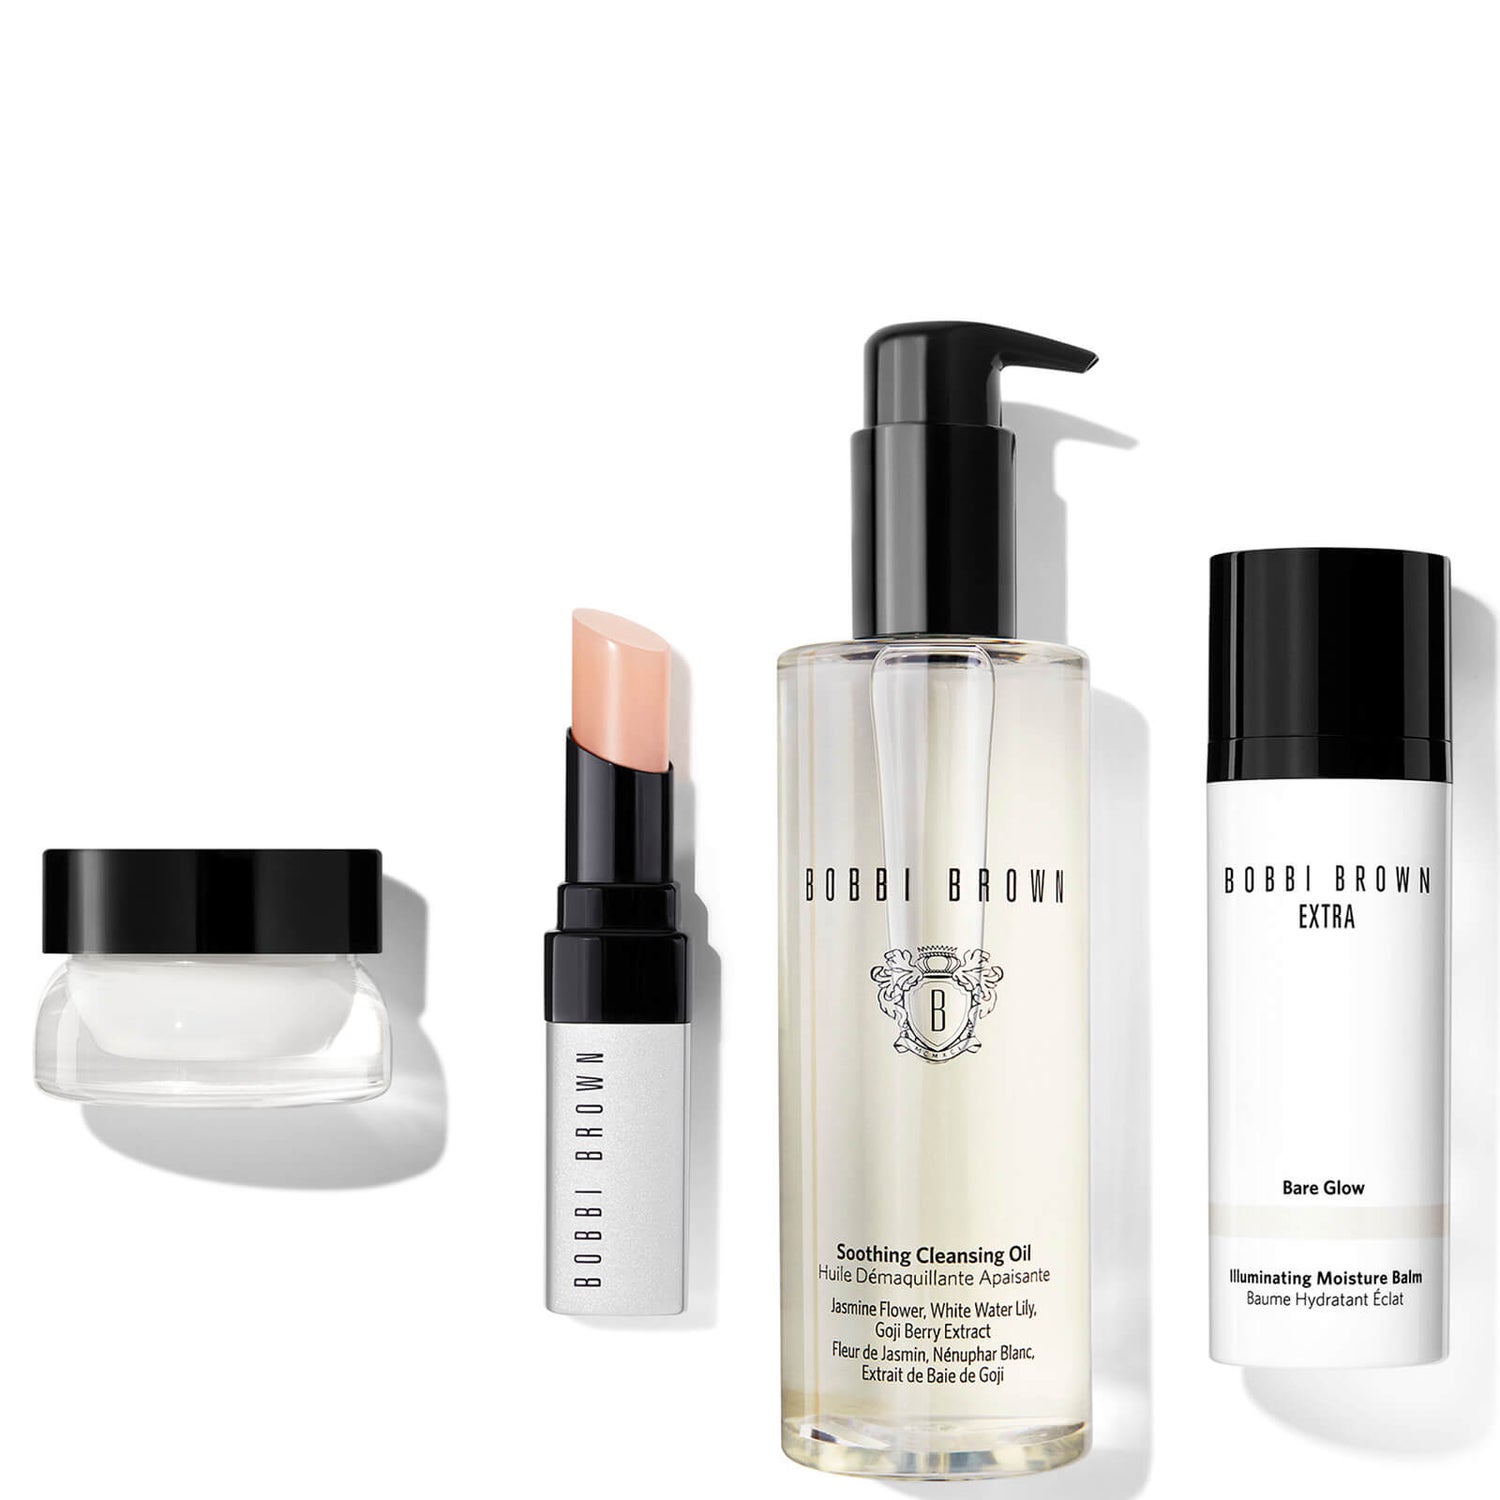 Bobbi Brown Cleanse and Care Extra Hautpflegeset